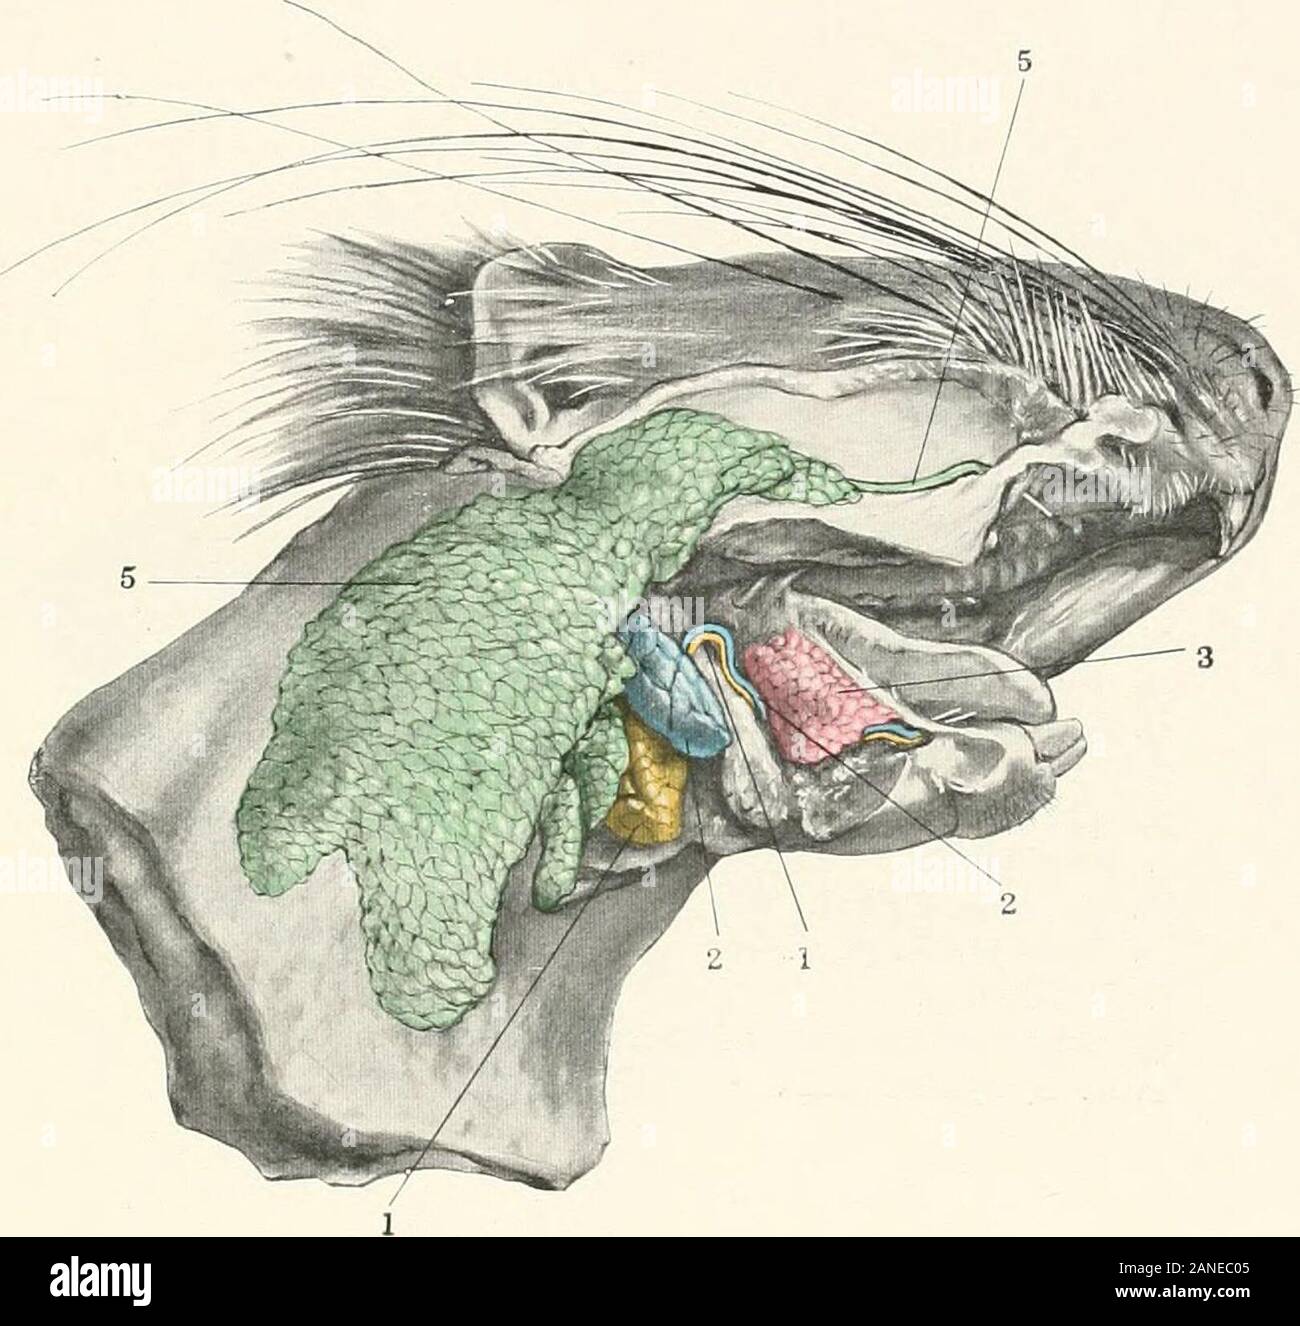 Contributions to the anatomy and development of the salivary glands in the mammalia . Plate XCIII Fig. 8. Hystrix Afric^-Australis — African Porcupine.Princeton University Morphological Museum, No. 1440. 1,1. SubmaxQlary gland and duct.2, 2. Greater sublingual gland and duct.J. Lesser sublingual glands.5, 5. Parotid gland and duct. PLATE XCII. Fig. S. Plate XCIV Fig. q. Fiber Zibethicus — Muskrat.Princeton University Morphological Museum, No. 460. 1. Submaxillary duct. la. Left submaxillary gland.lb. Right submaxillary gland. 2, 2. Greater sublingual gland and duct.J. Lesser sublingual glands. Stock Photo